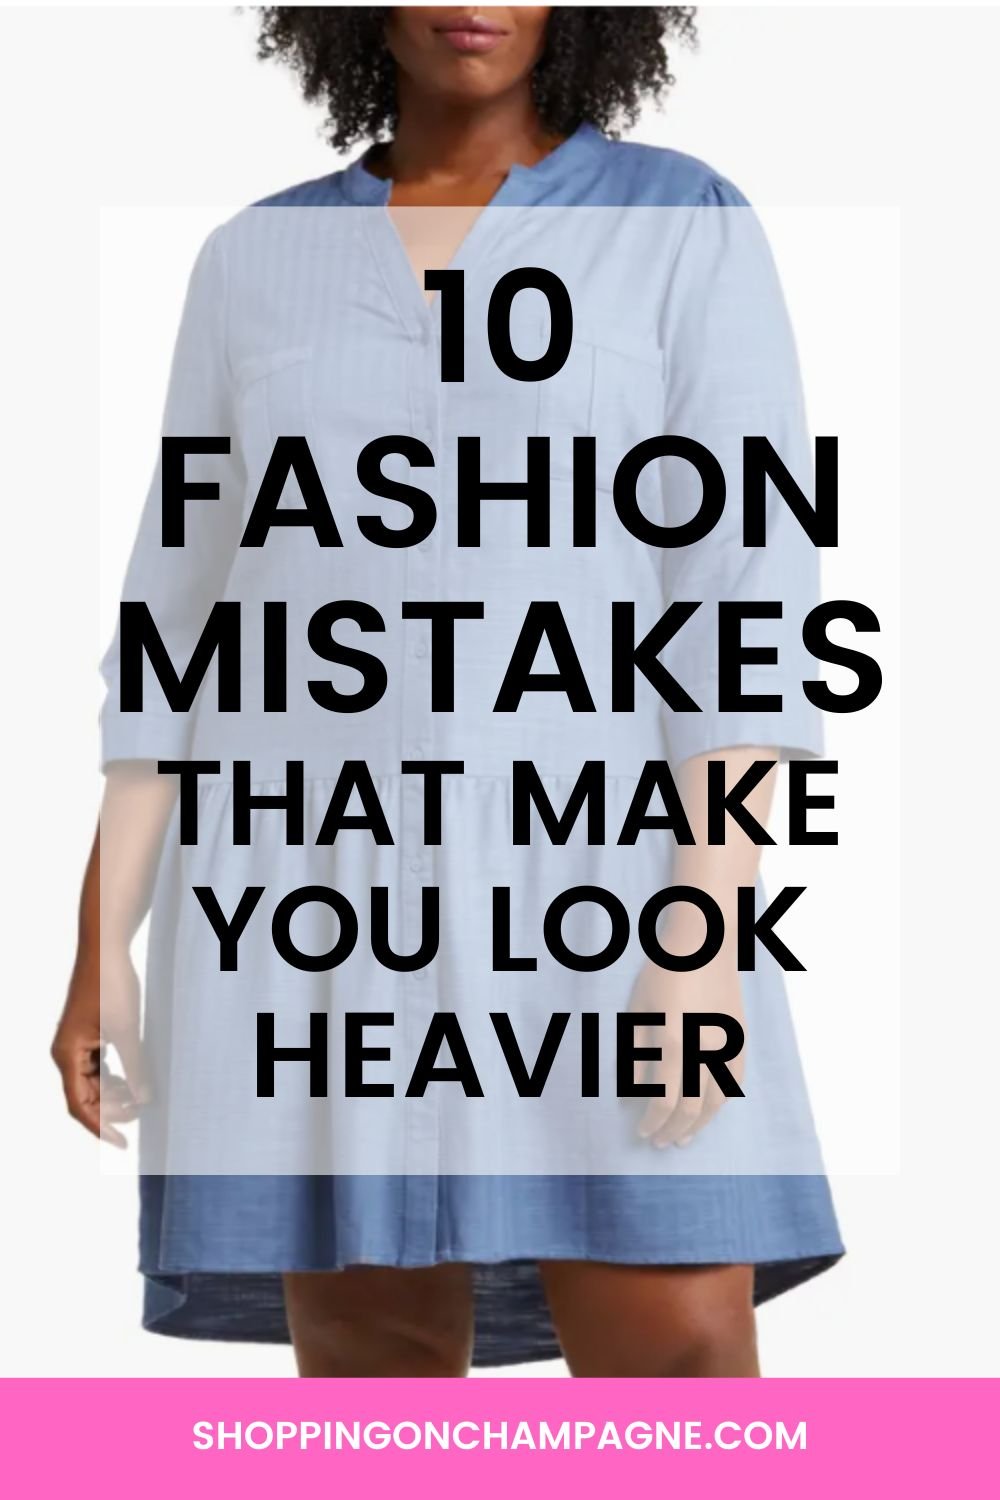 10 Fashion Mistakes that Make You Look Heavier — Shopping on Champagne, Nancy Queen